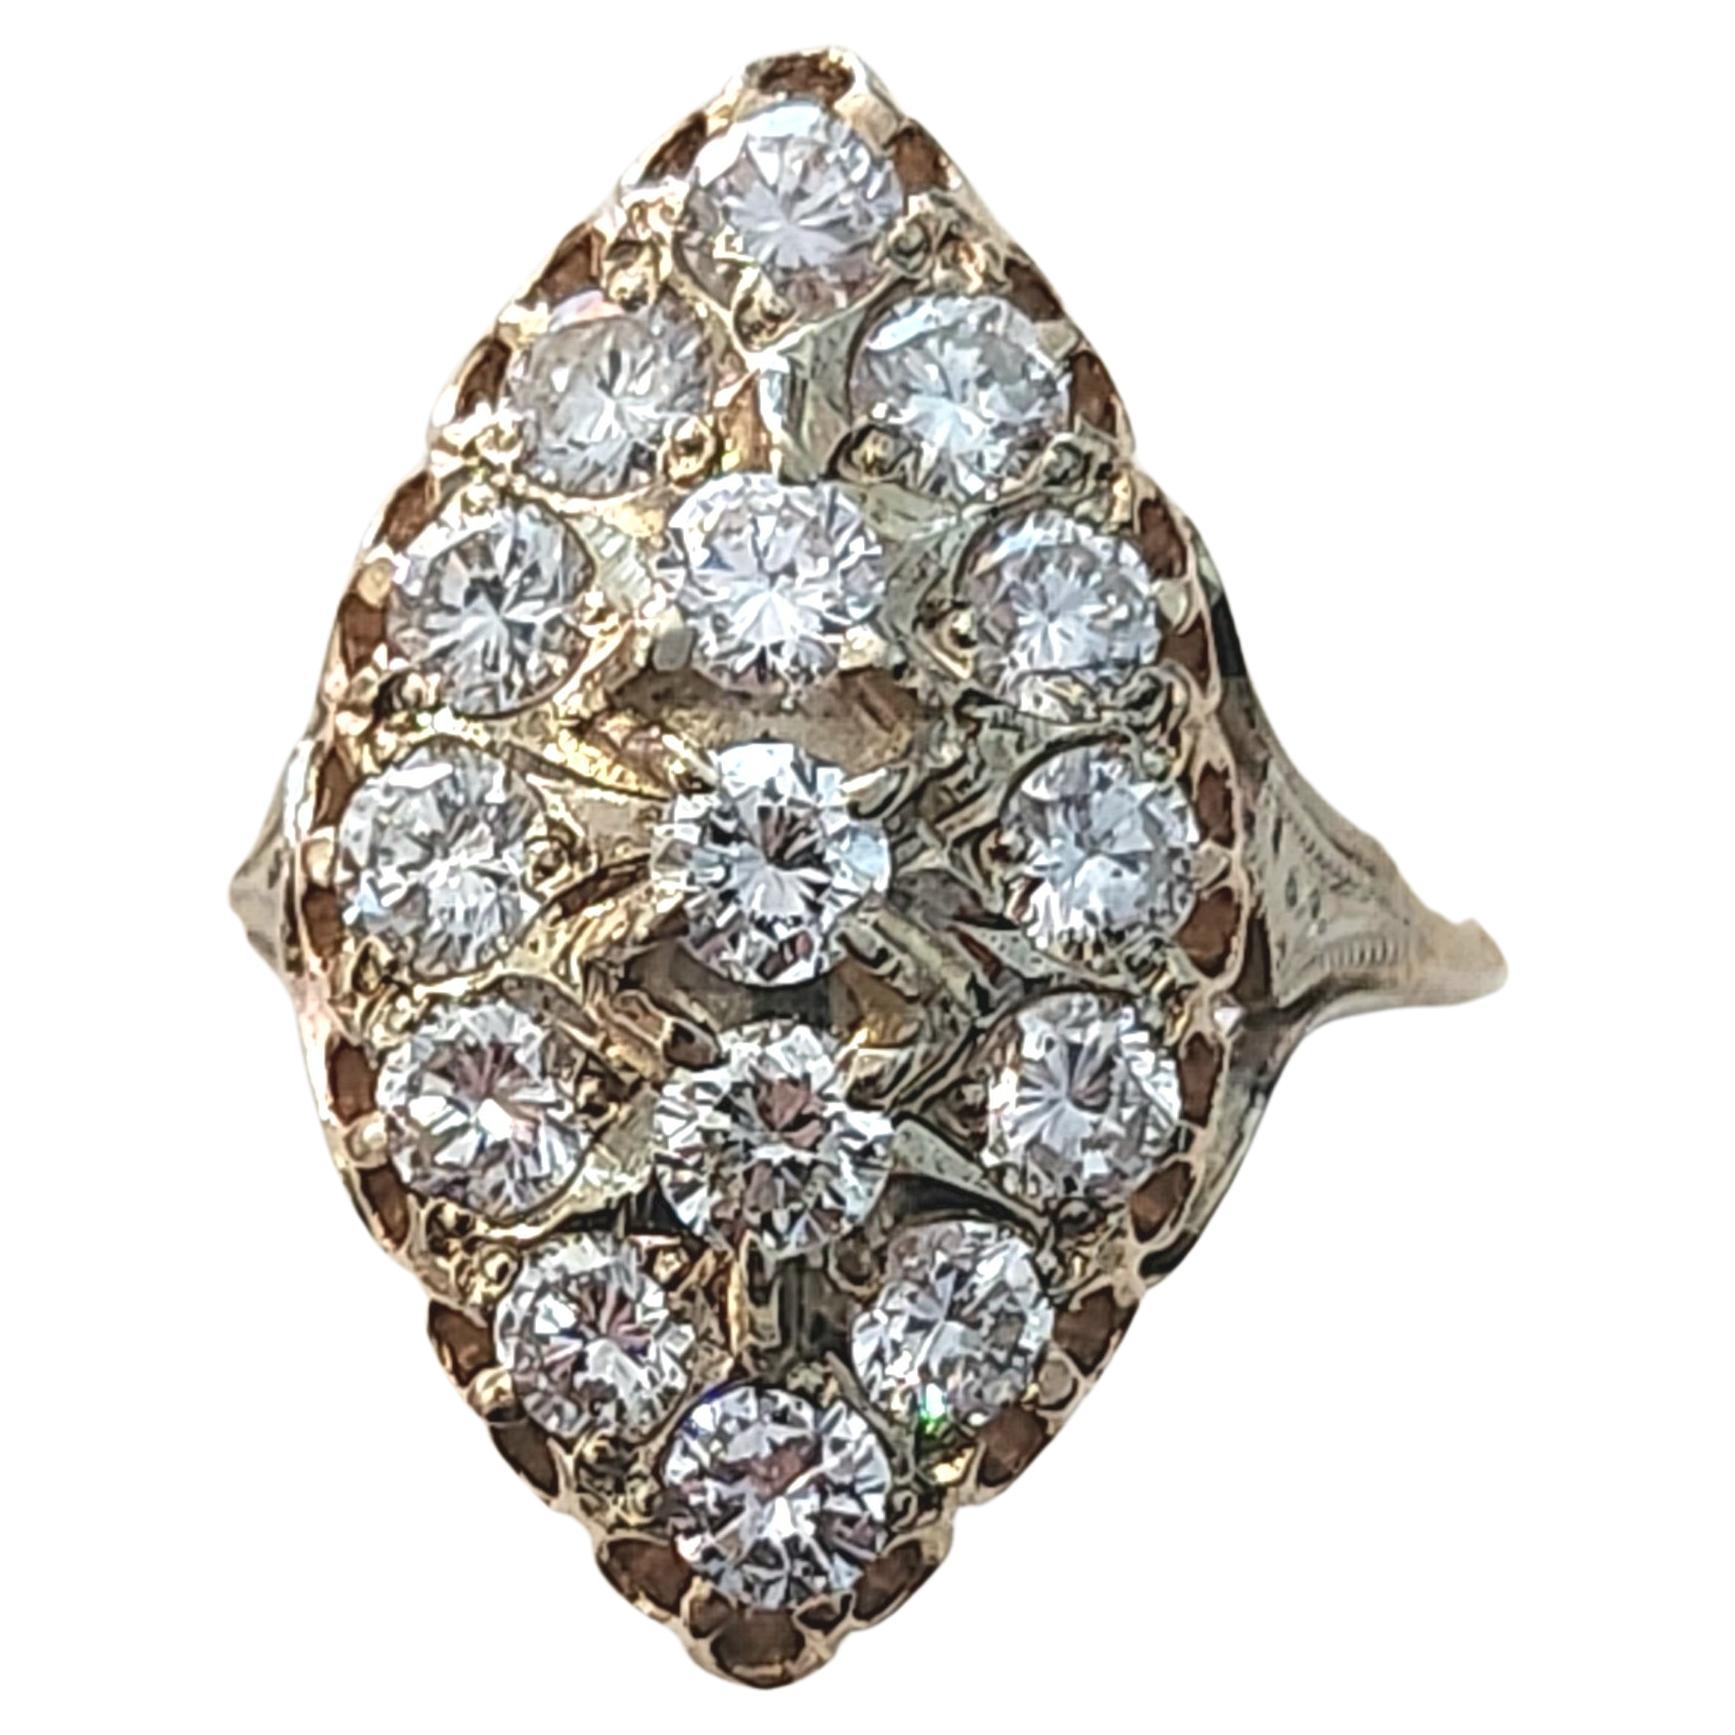 Vintage brilliant cut diamond ring with an estimate weight of 1.60 carats G color rare white excellent cut and spark vs clearity in 14k gold setting with detailed work magnificent workmanship ring was made during the soviet union era 1960s hall